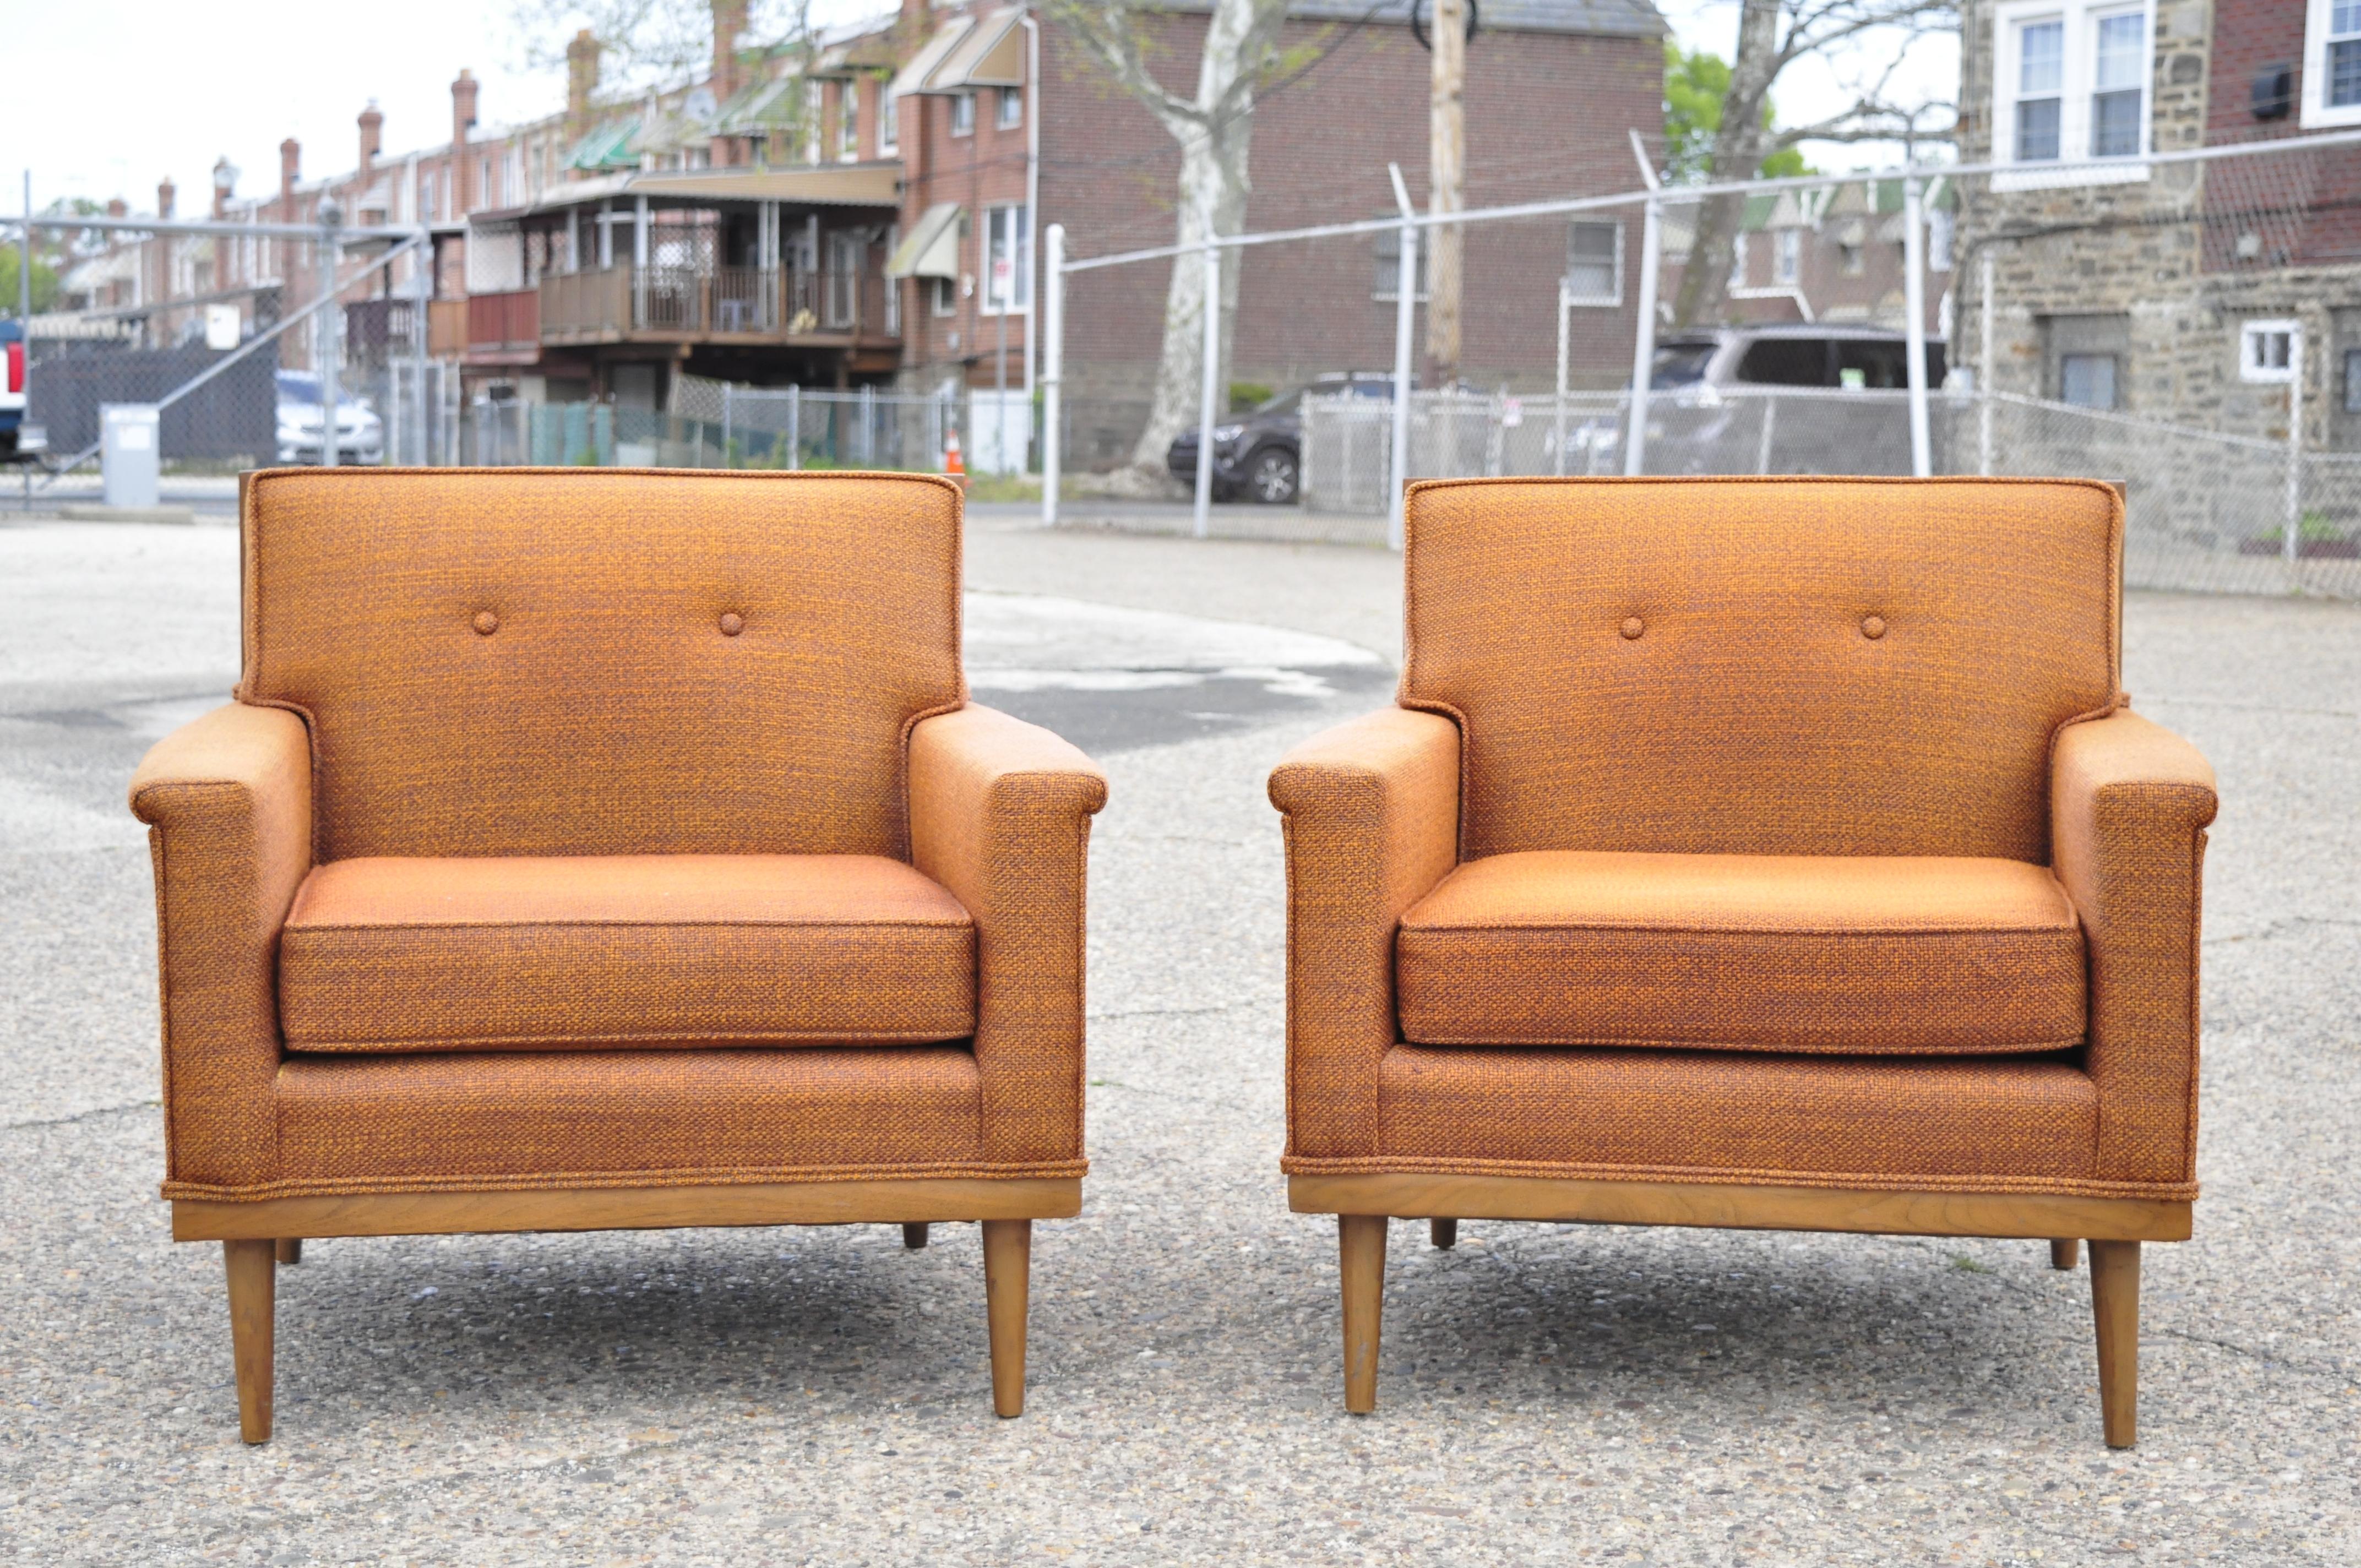 Pair of Mid-Century Modern Paul McCobb style club lounge chairs by J.B. Sciver. Item features a solid wood trimmed frame, flared arms, solid wood frame, original label, tapered legs, clean modernist lines, sleek sculptural form, circa mid-20th